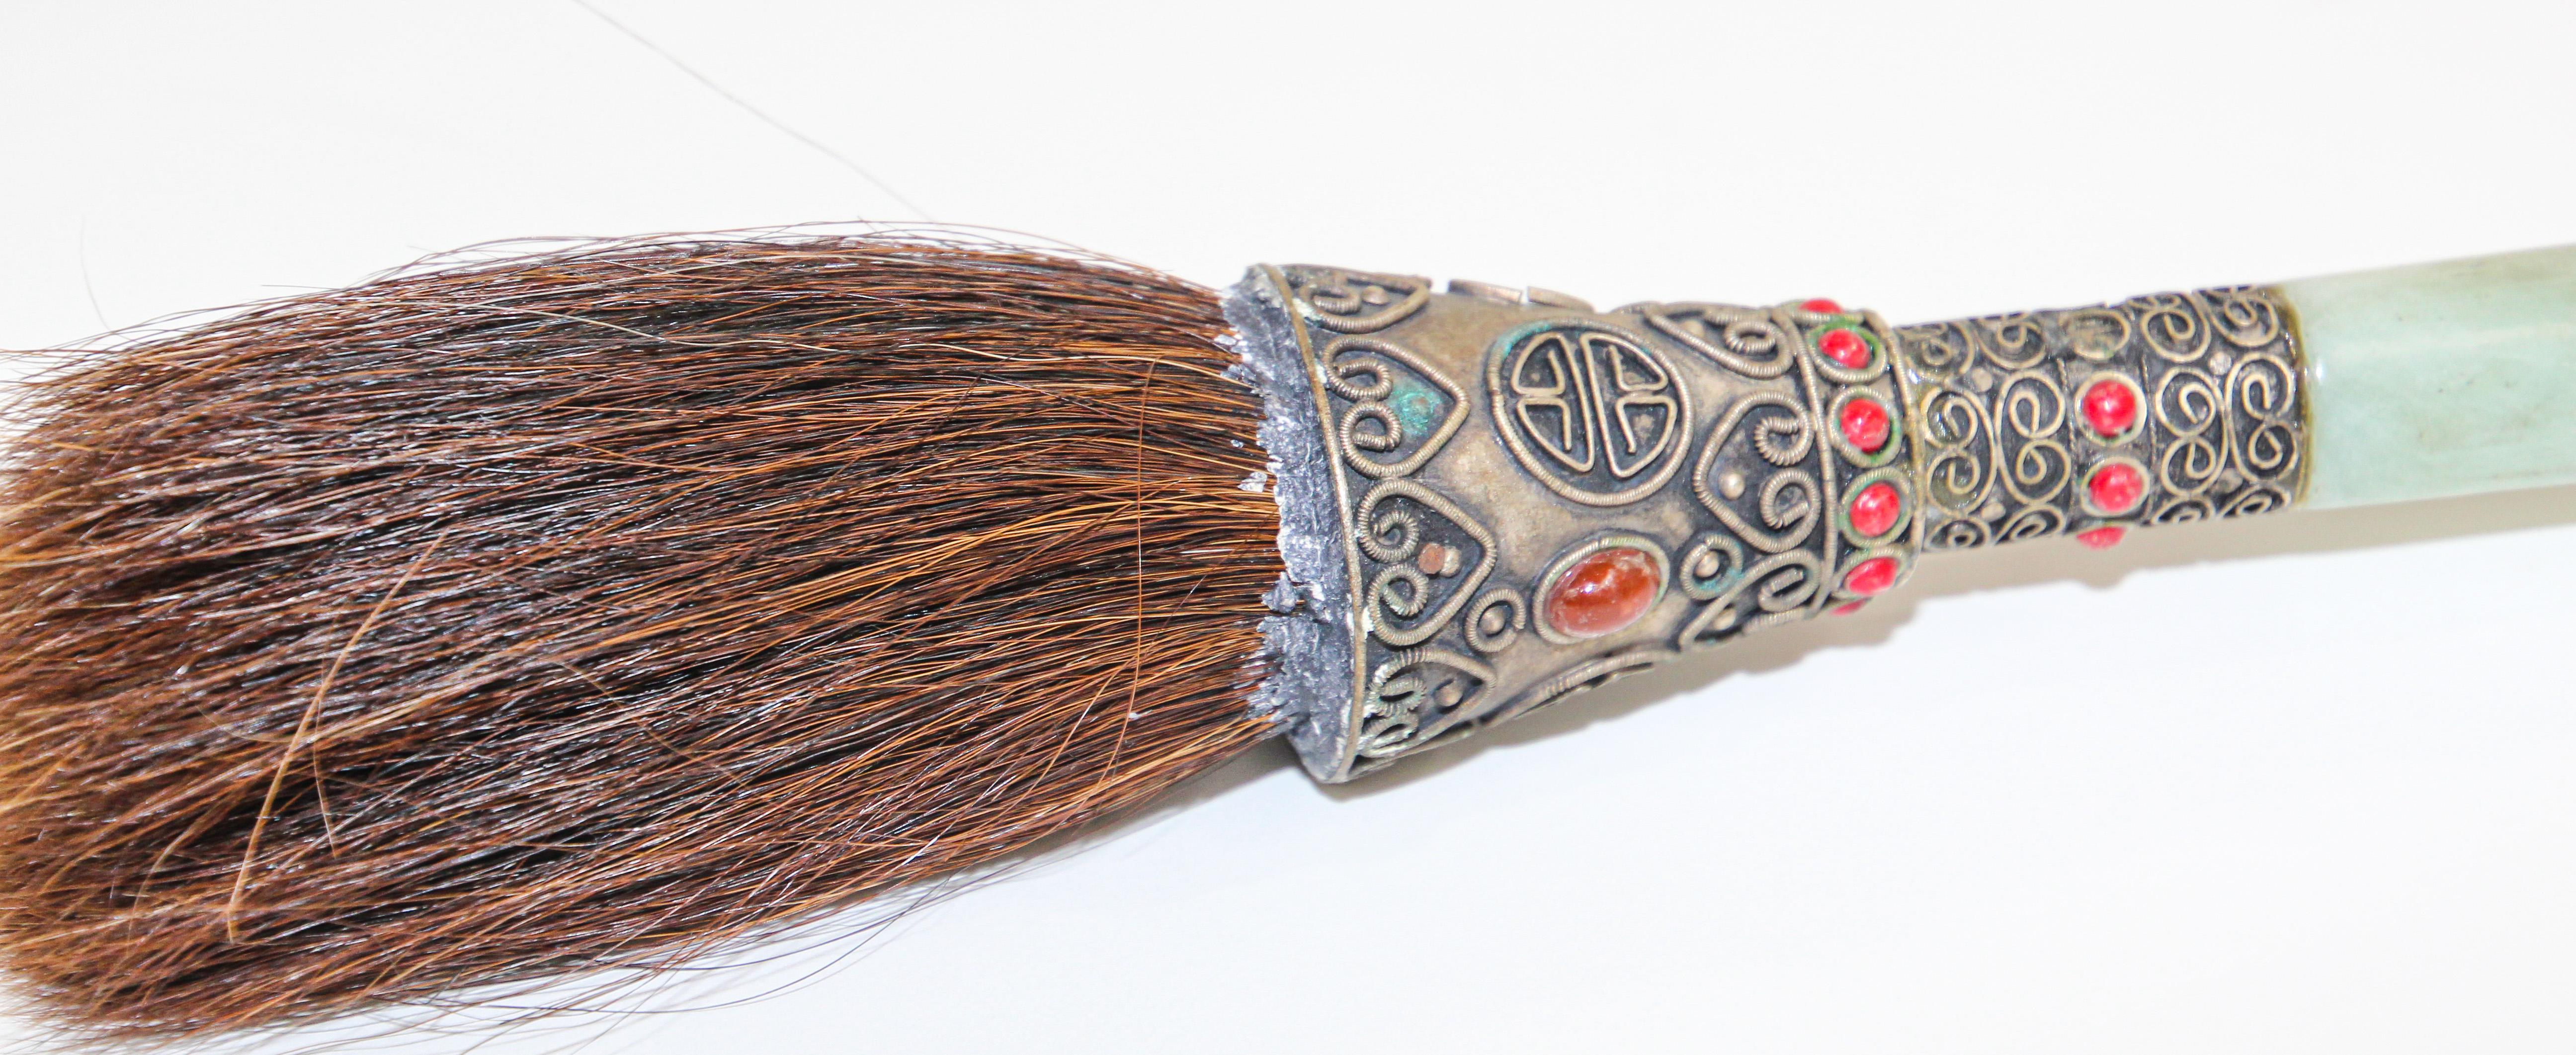 Beautiful hand made large Asian calligraphy art brush with natural hair bristles.
The handle is quite extraordinary; made of jade green soapstone, the metal knob very beautiful detail in the metal filigree designs and red stones with horse hair.